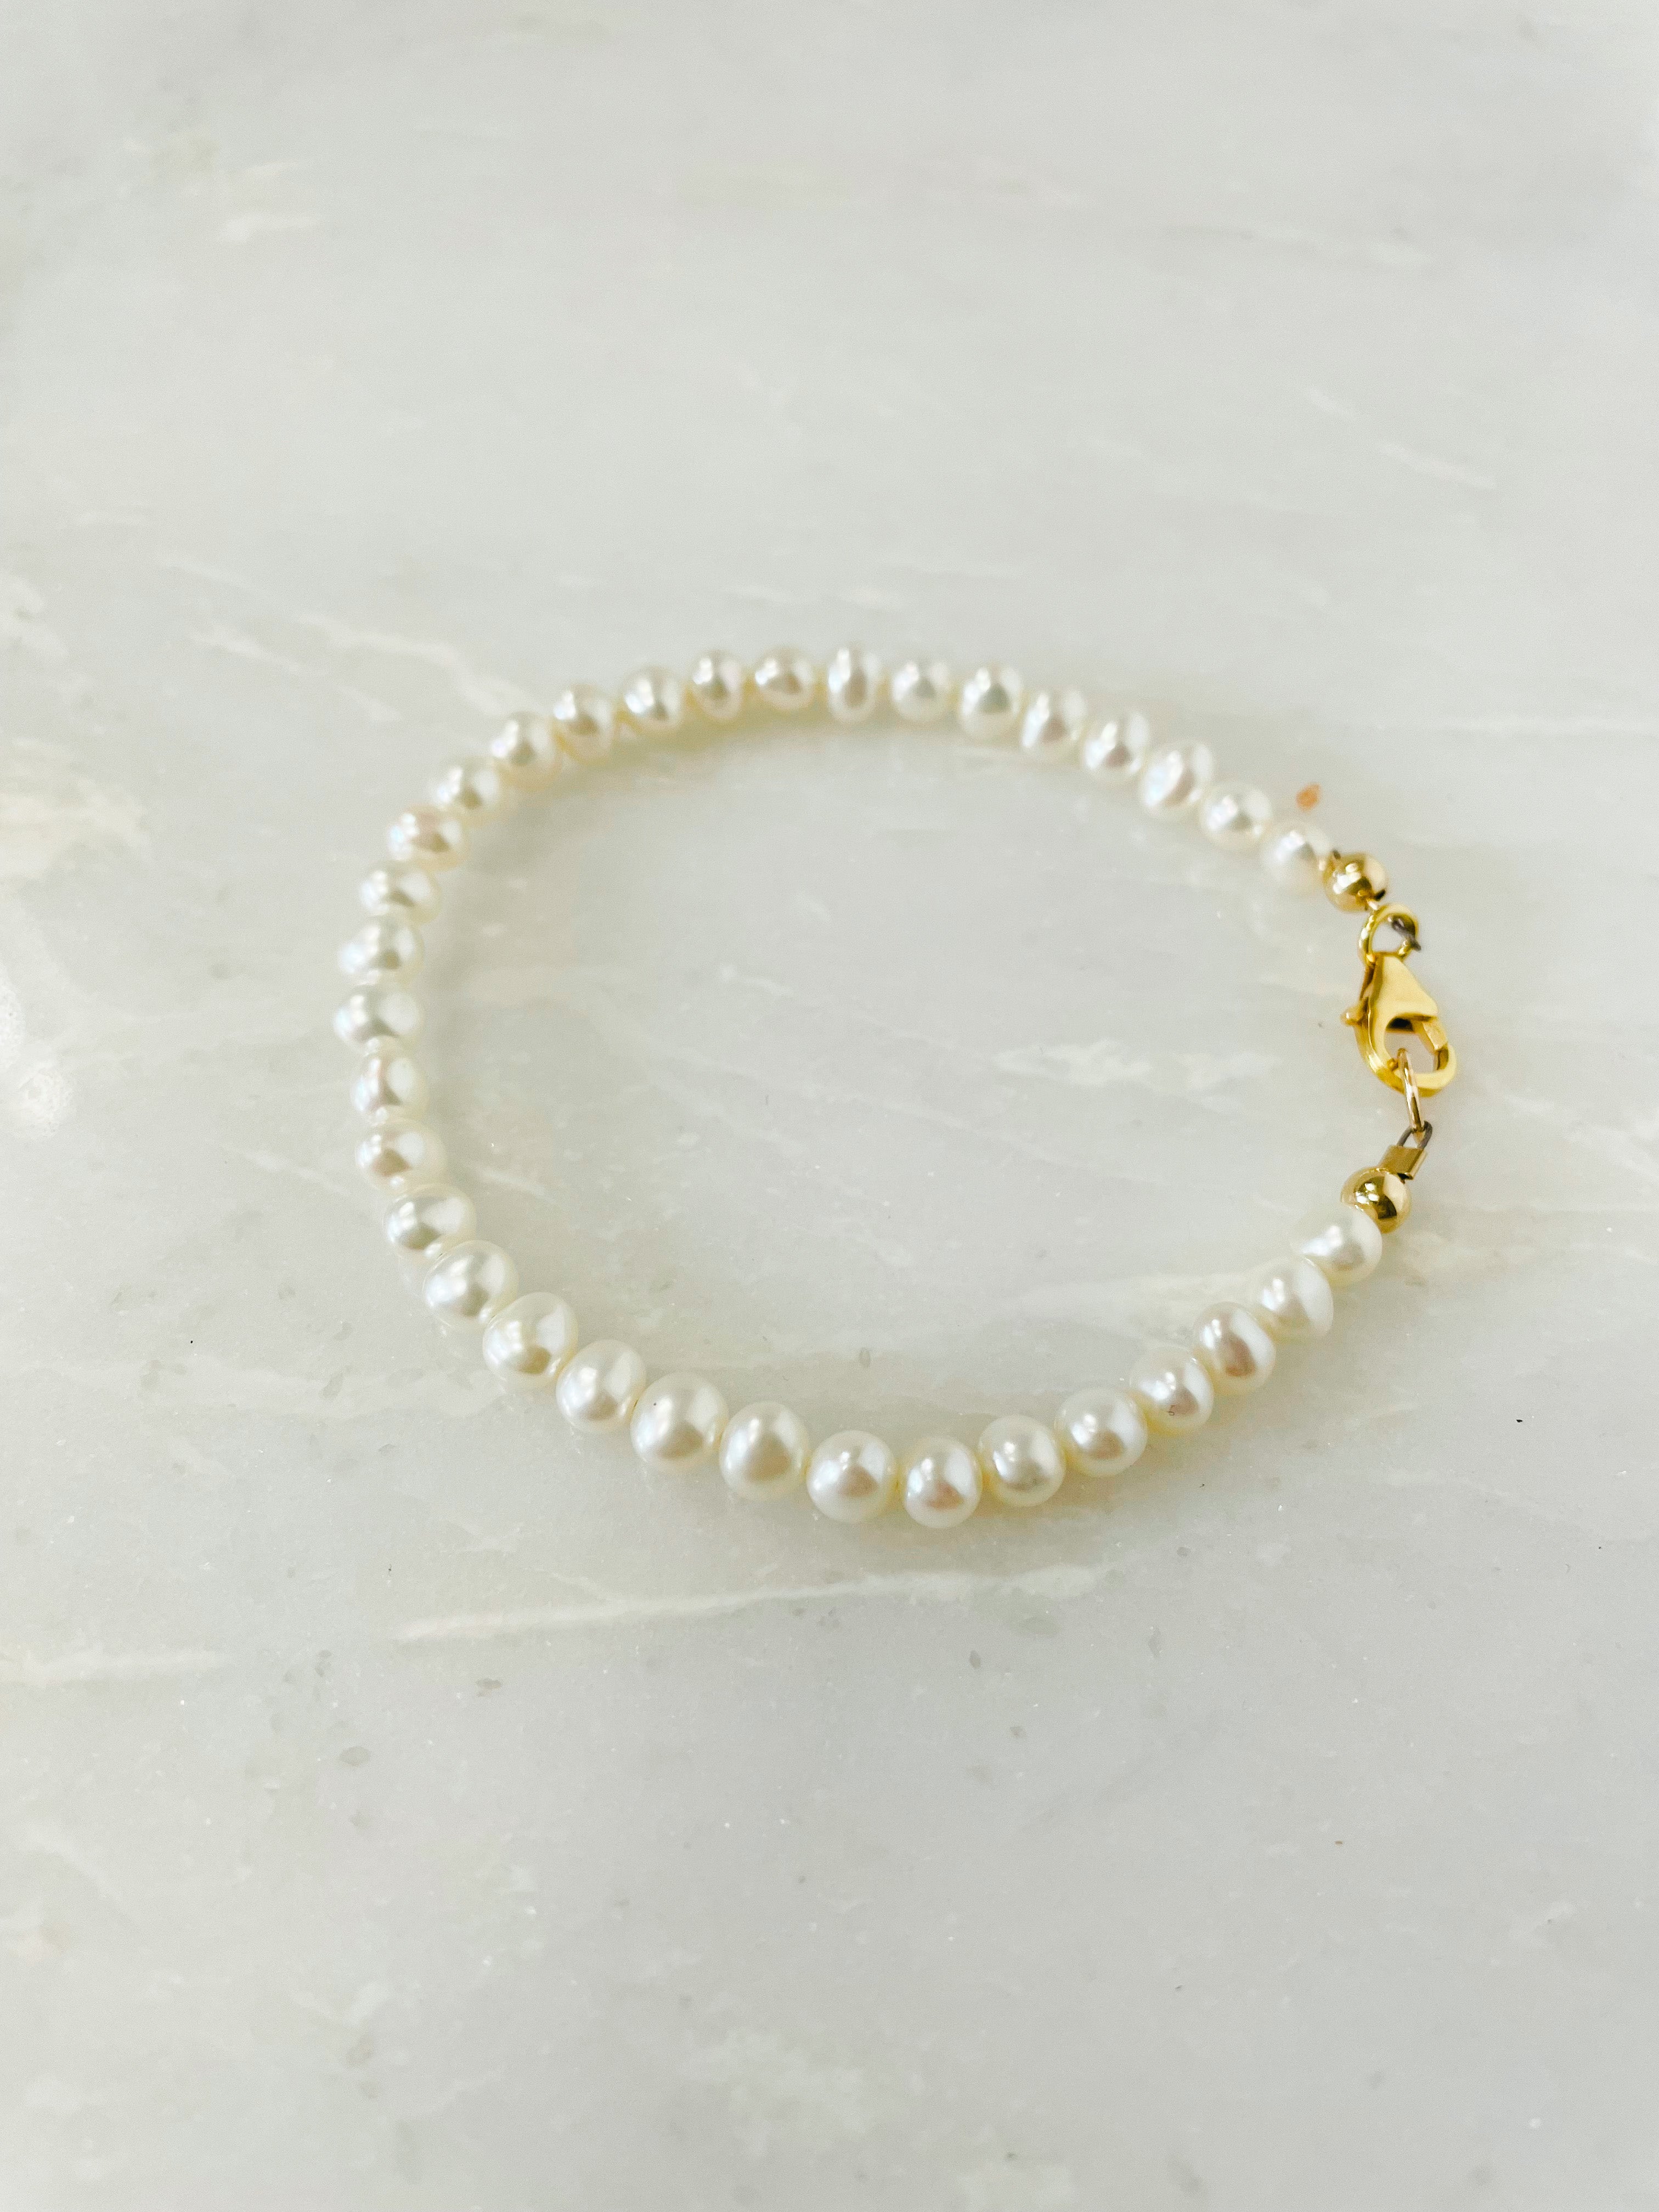 22k gold pearl and beads bracelet designs - Indian Jewellery Designs